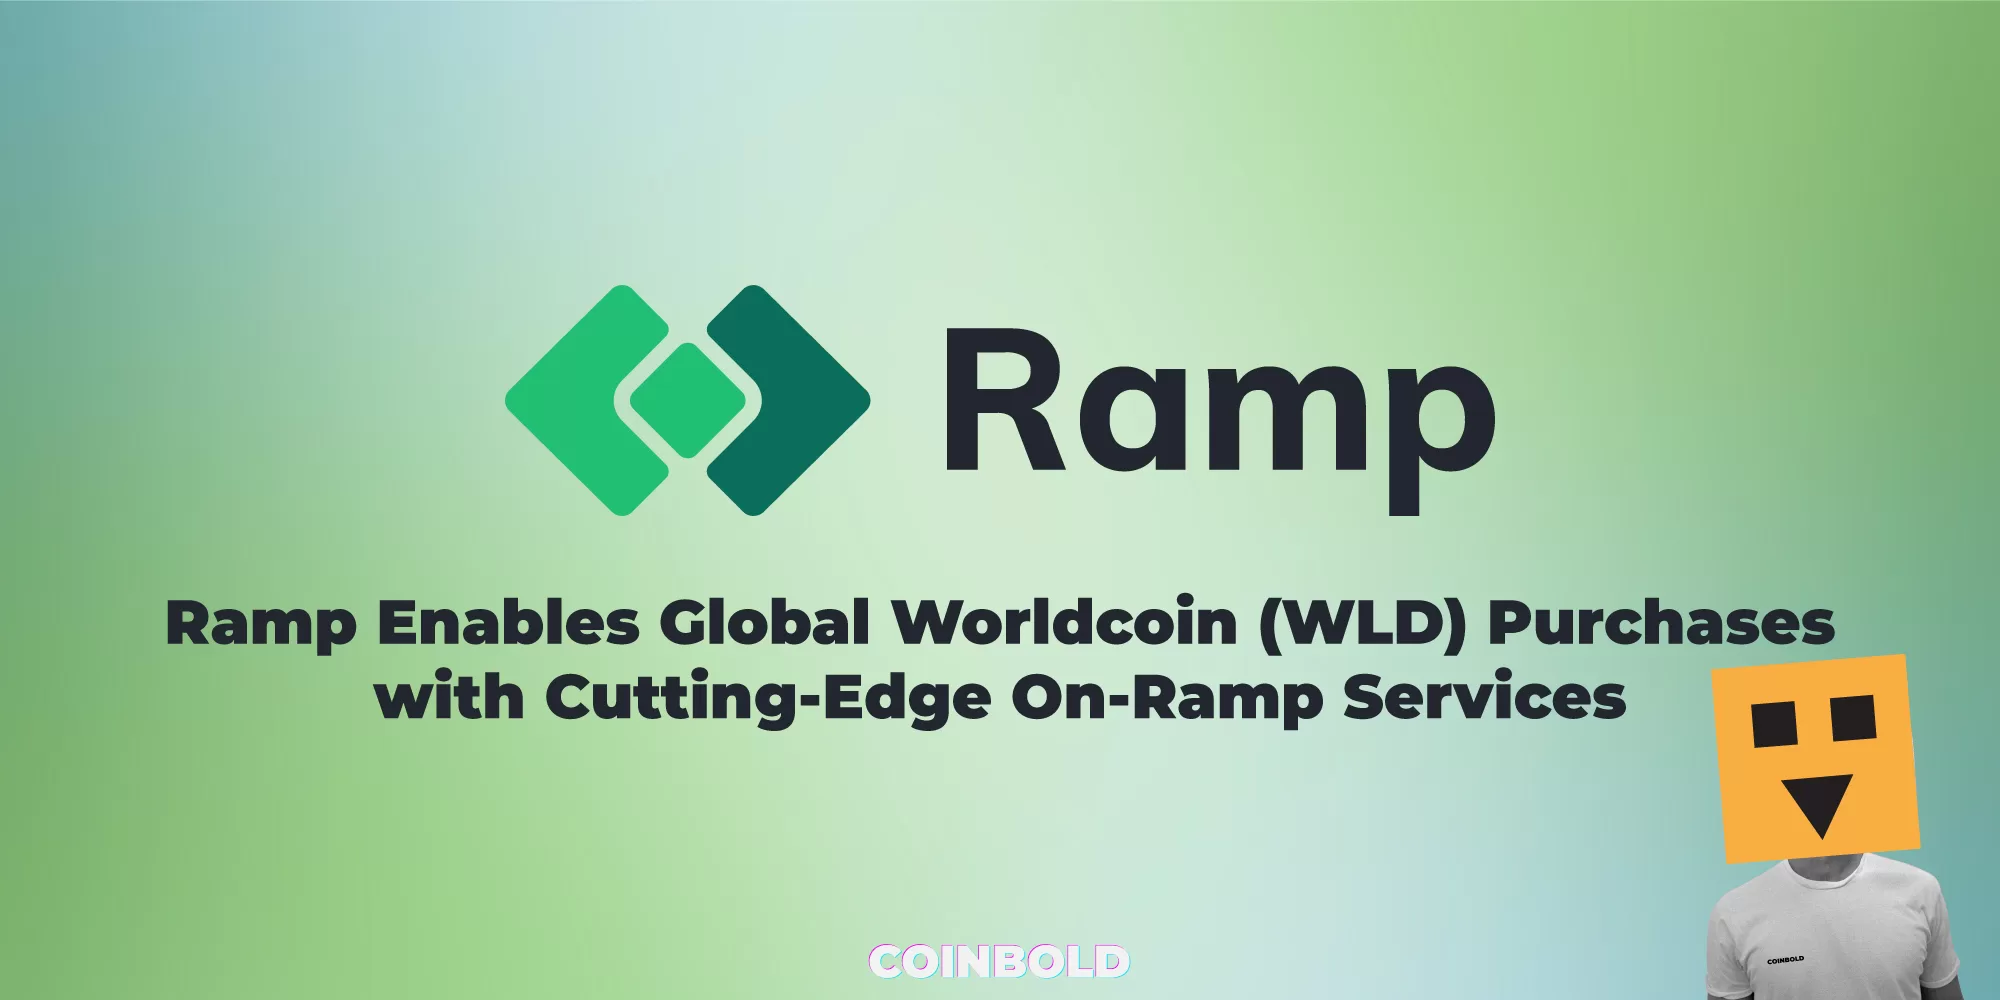 Ramp Enables Global Worldcoin (WLD) Purchases with Cutting-Edge On-Ramp Services